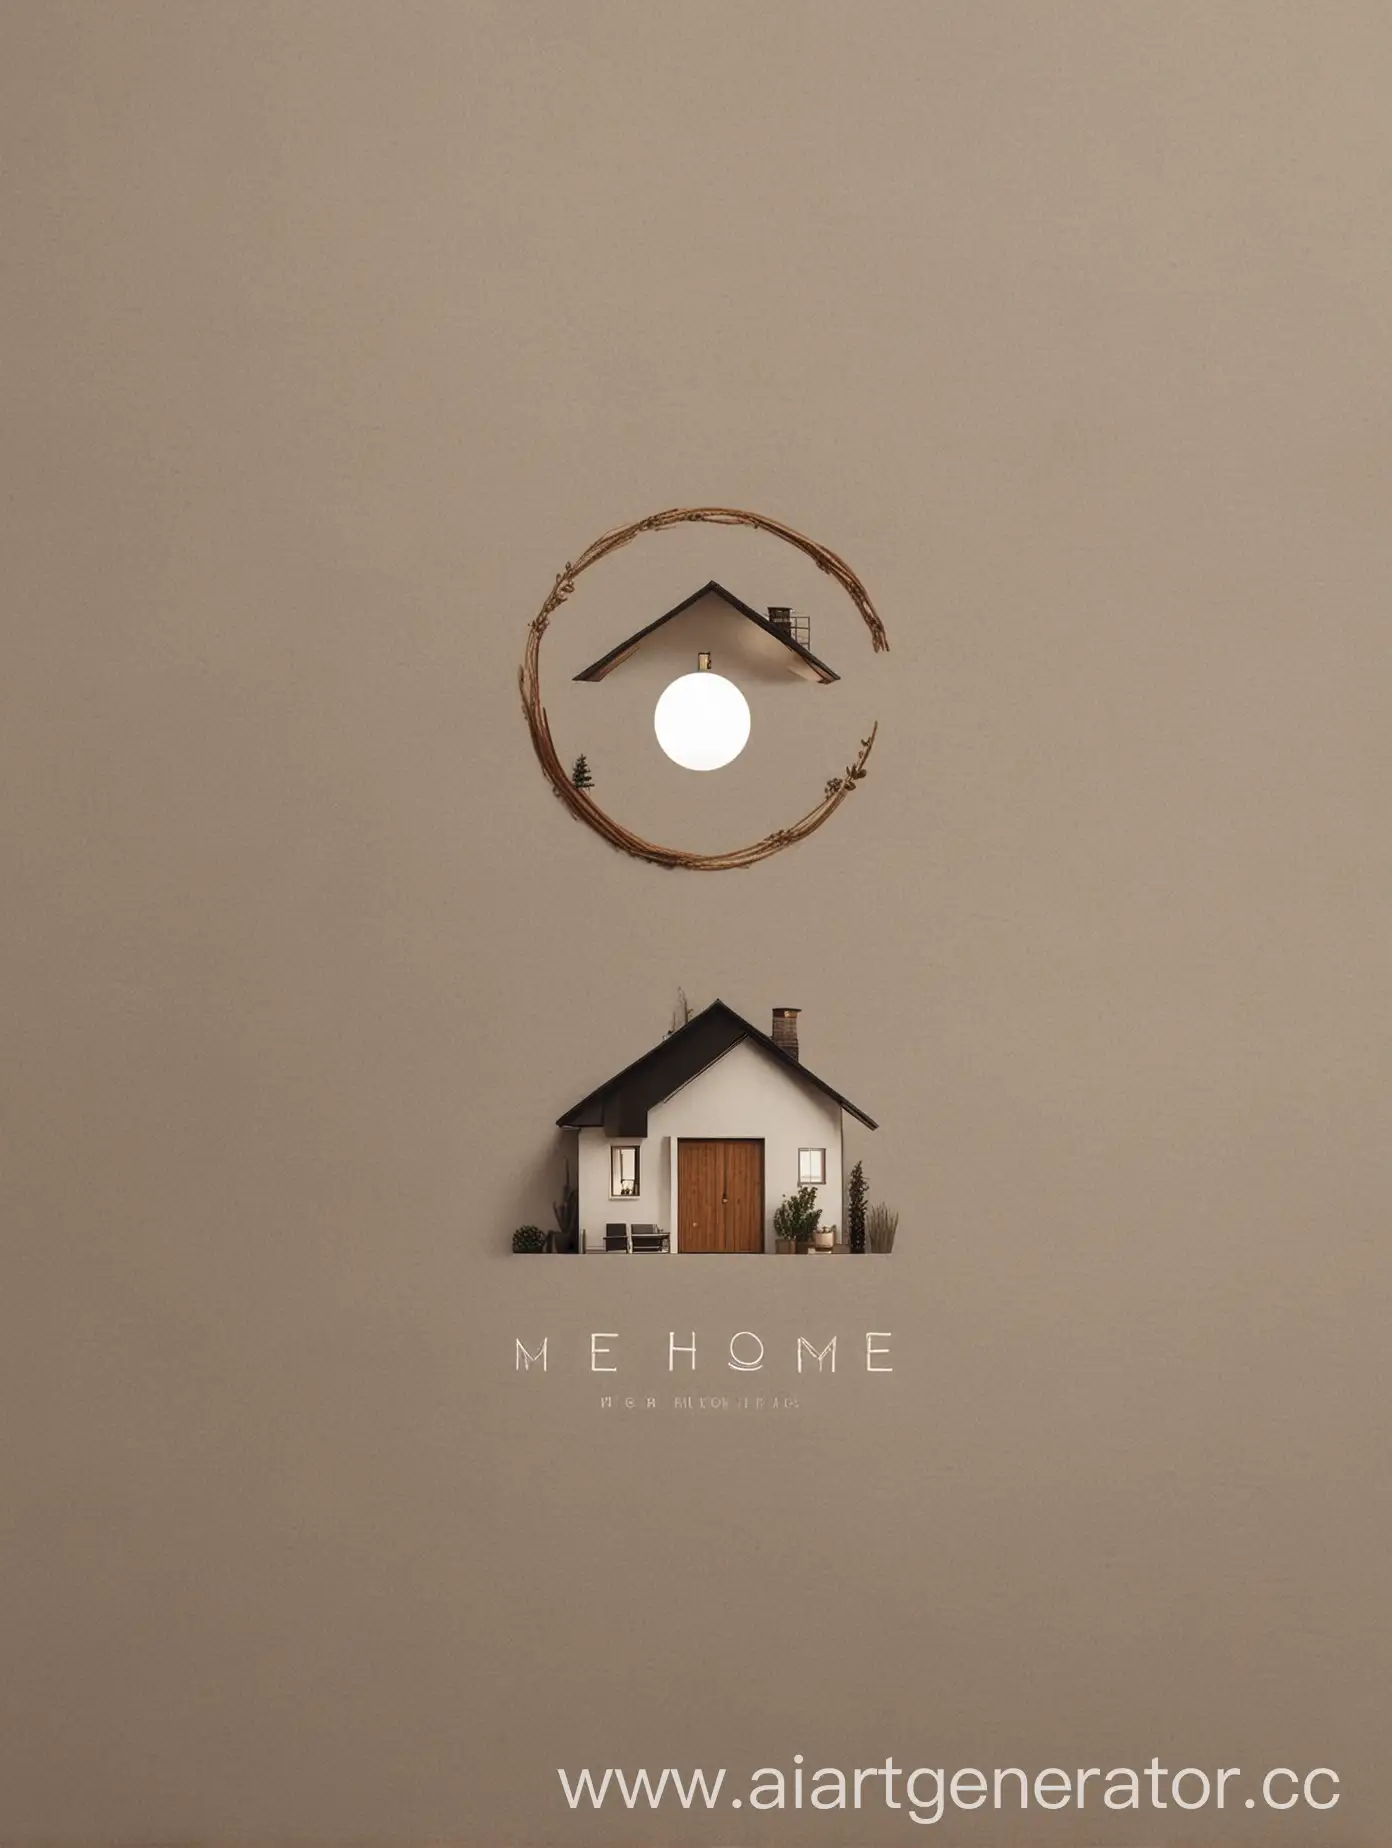 Minimalistic-MEhome-Brand-Logo-with-Cozy-House-Illustration